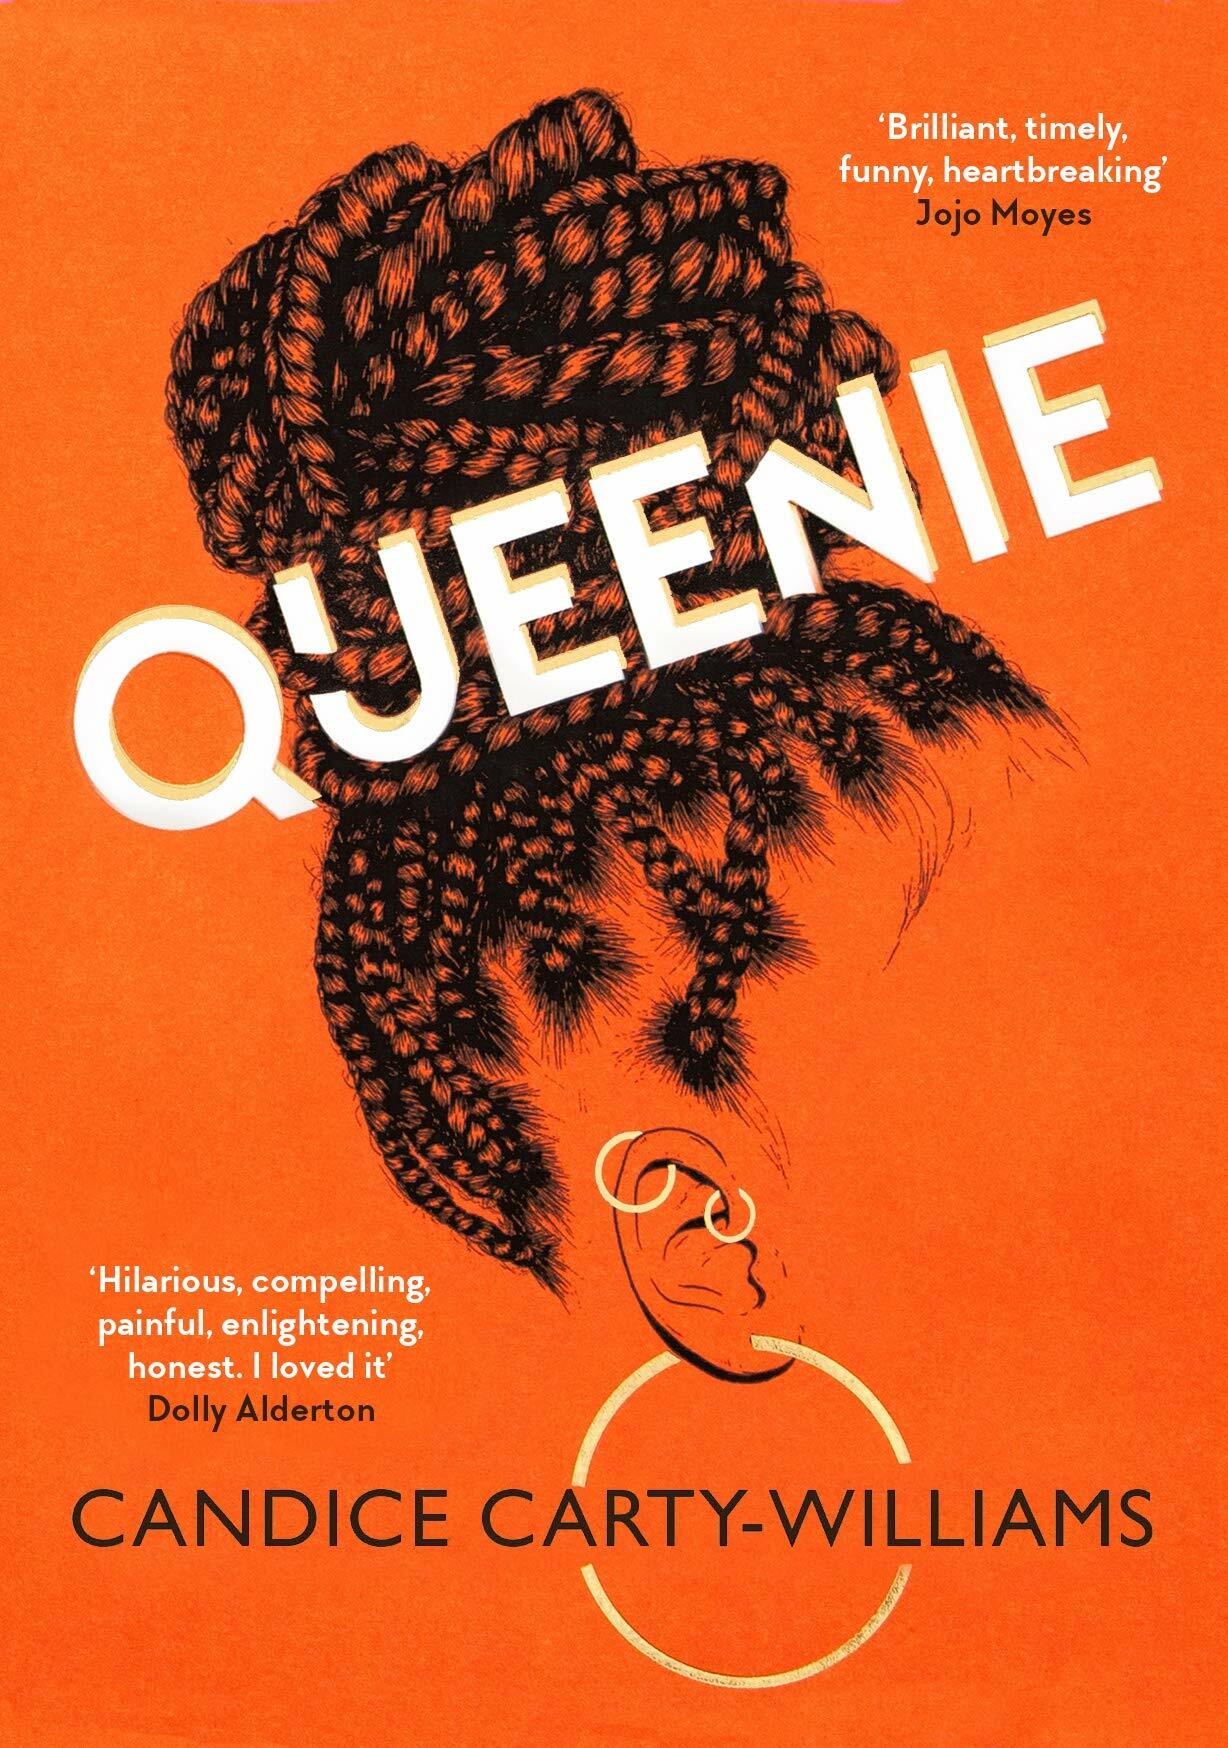 A woman with braids styled in an up-do. The cover of Queenie. 